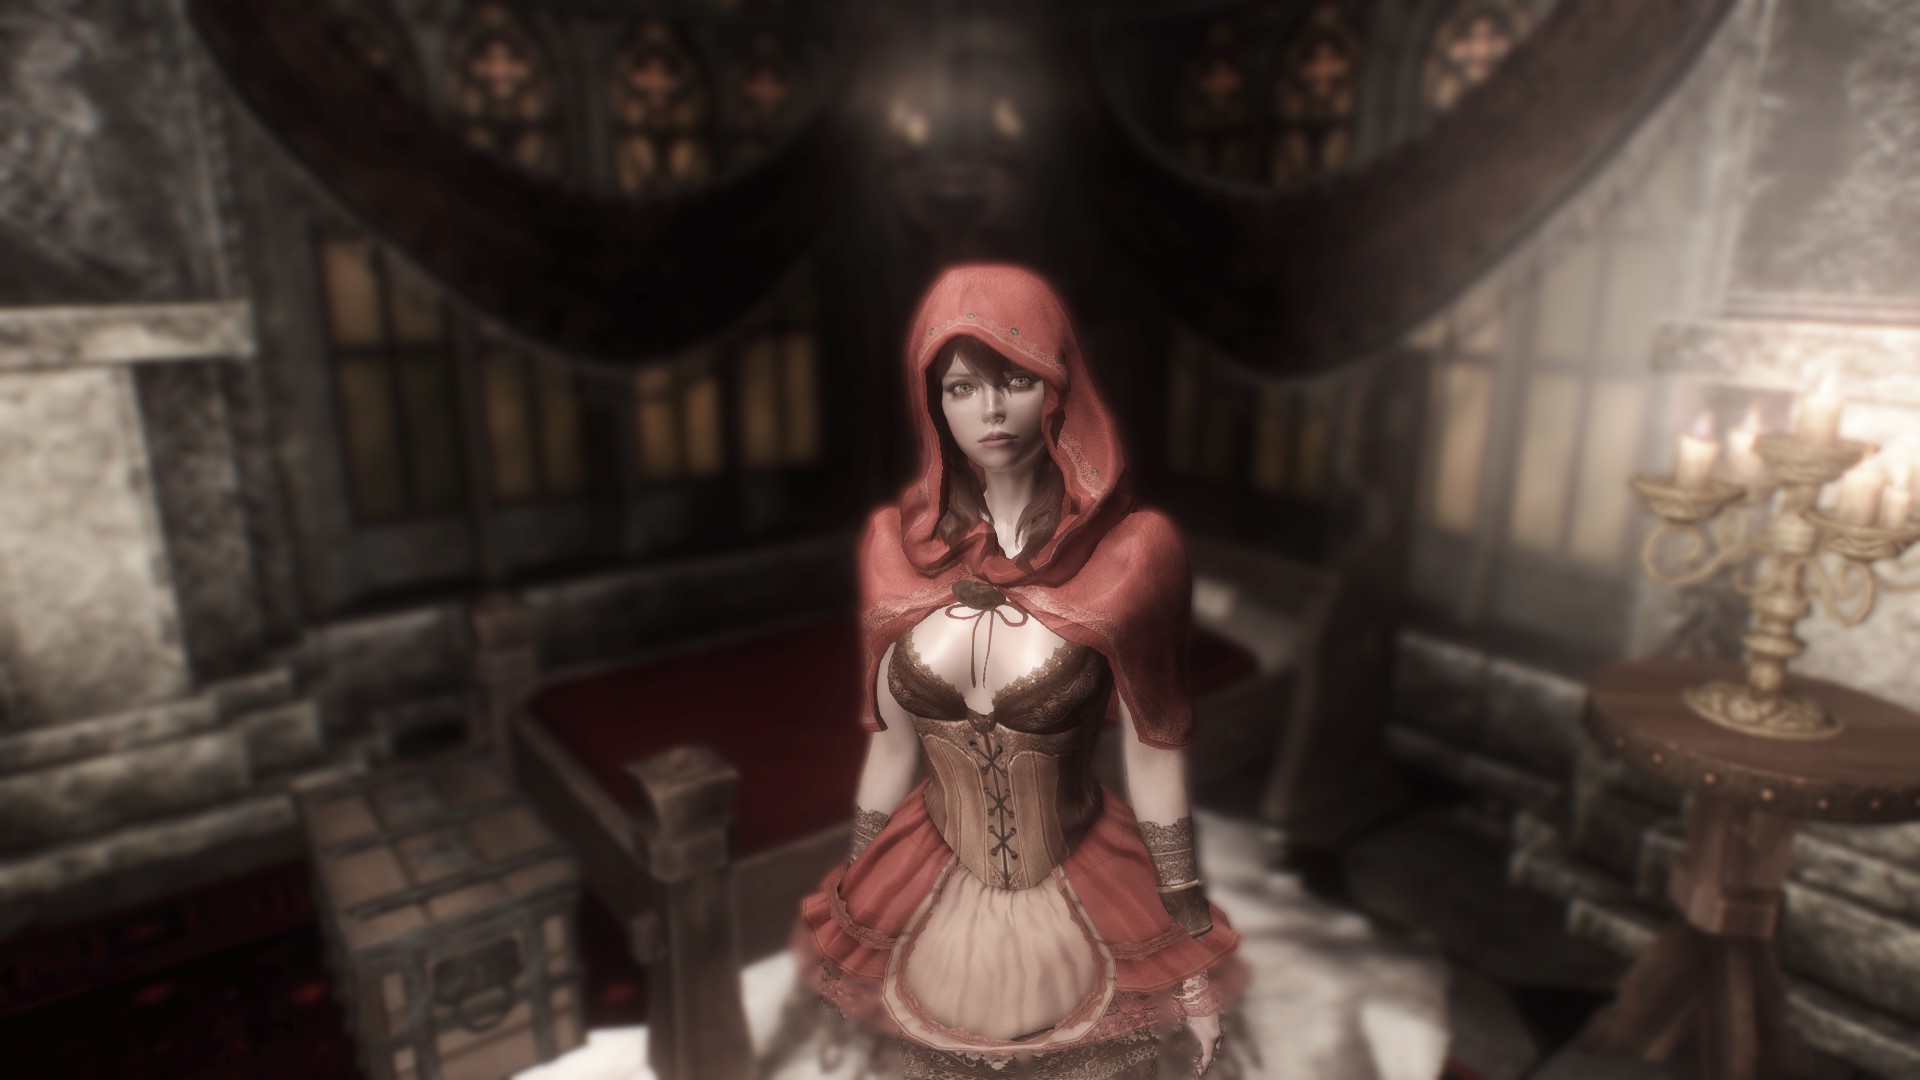 alex michael smith recommends red riding hood skyrim pic